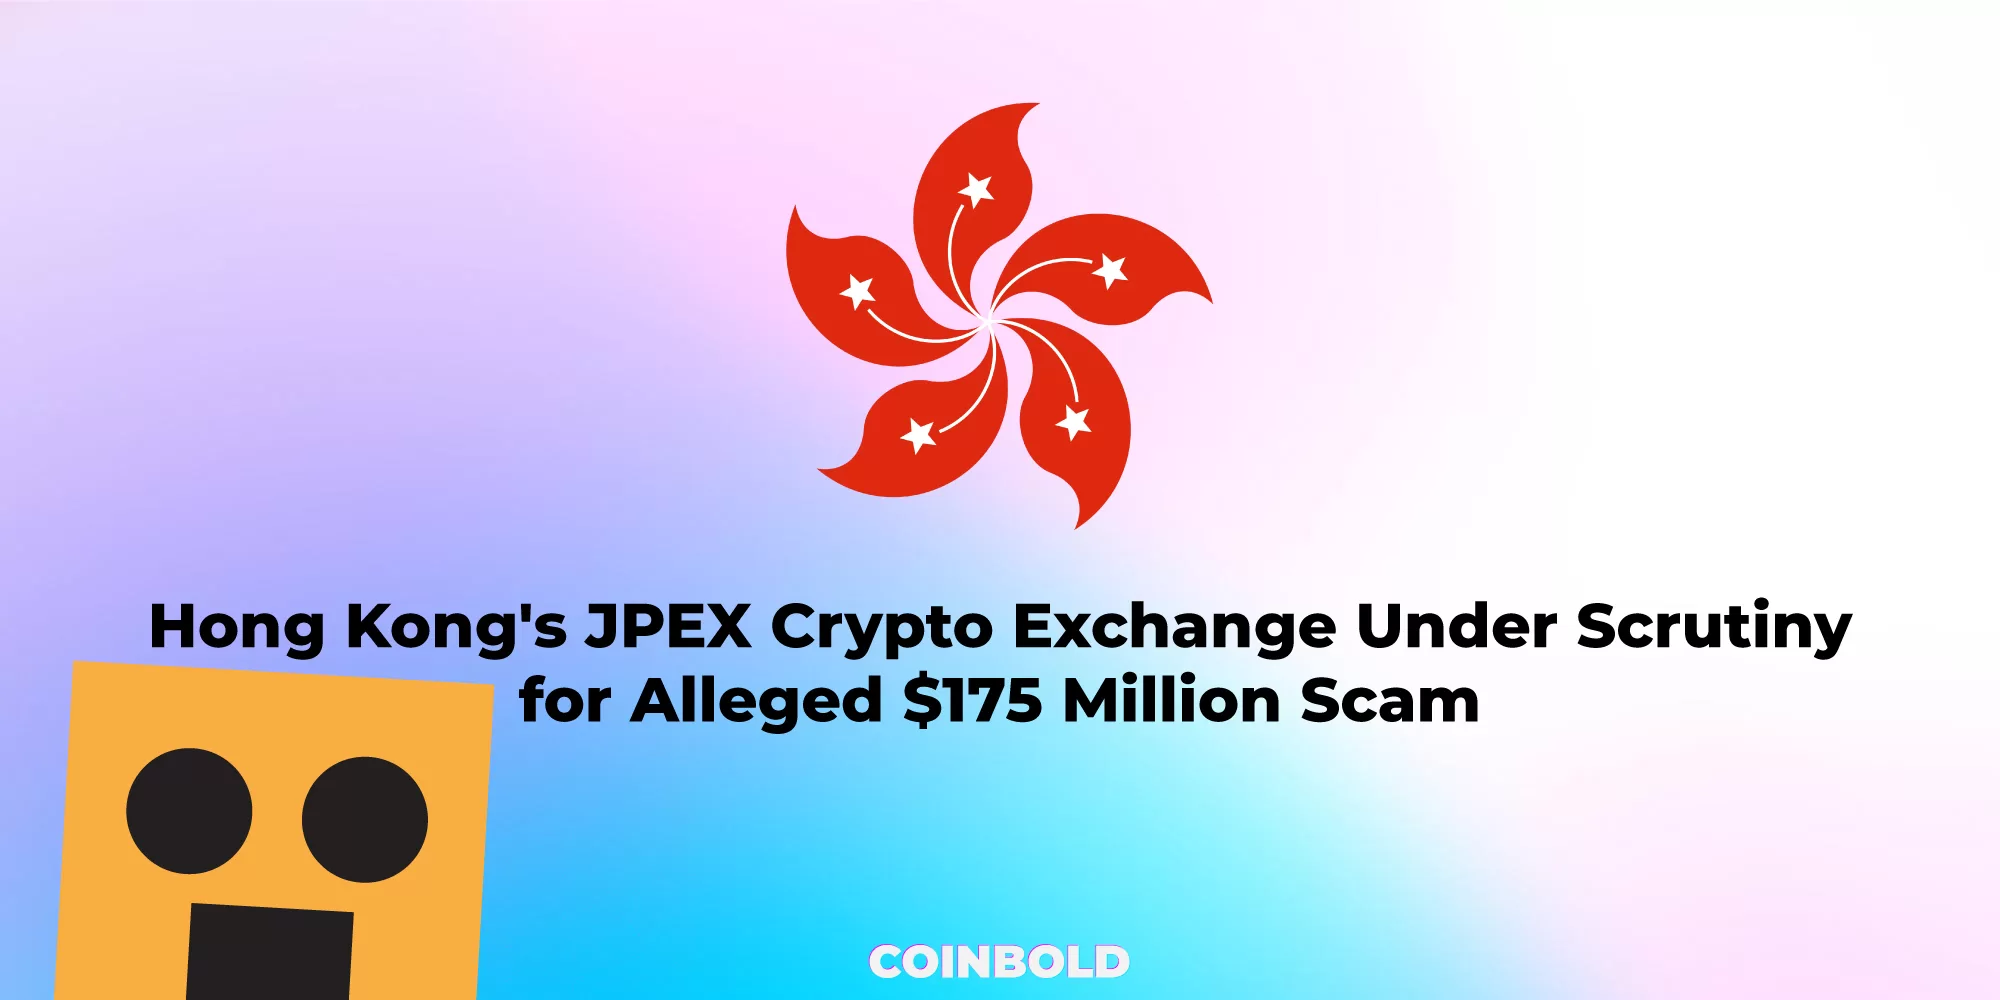 Hong Kong's JPEX Crypto Exchange Under Scrutiny for Alleged $175 Million Scam